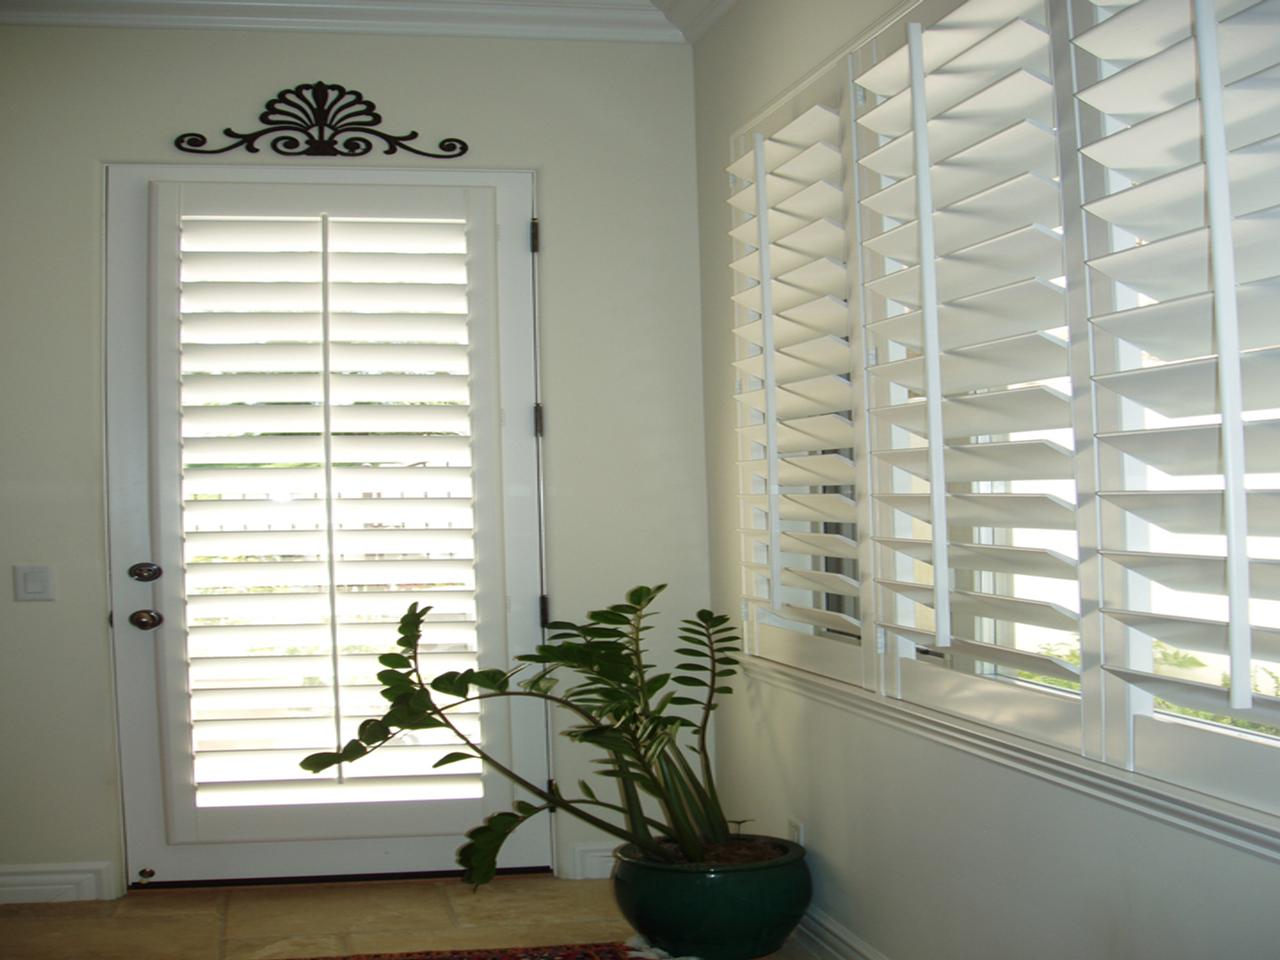 Glass door and windows with plantation shutters